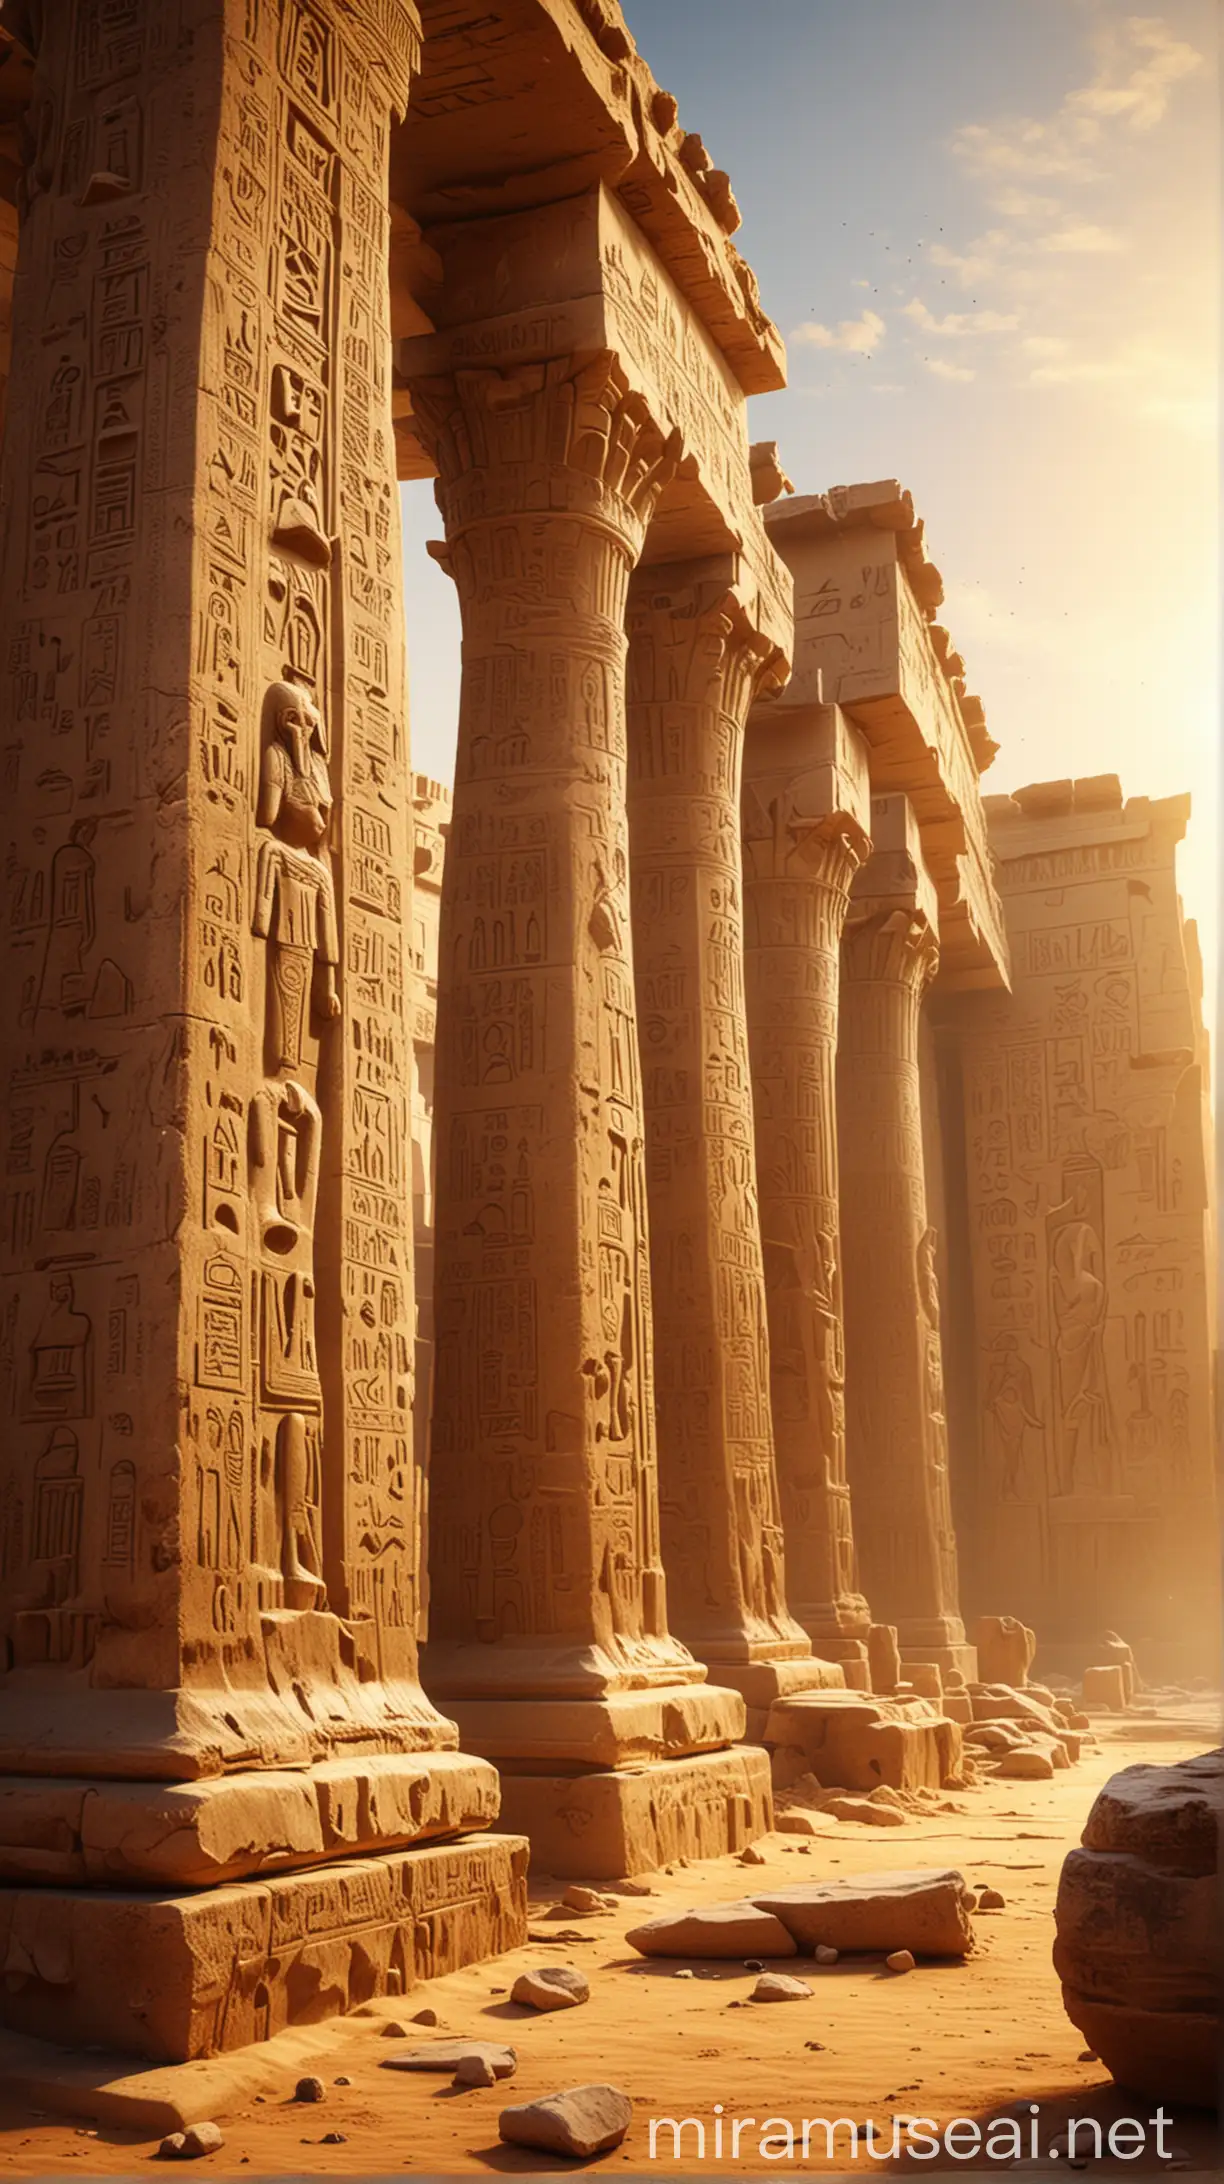 Ancient Egyptian ruins bathed in golden sunlight, with towering pillars and hieroglyphs carved into the stone. hyper realistic